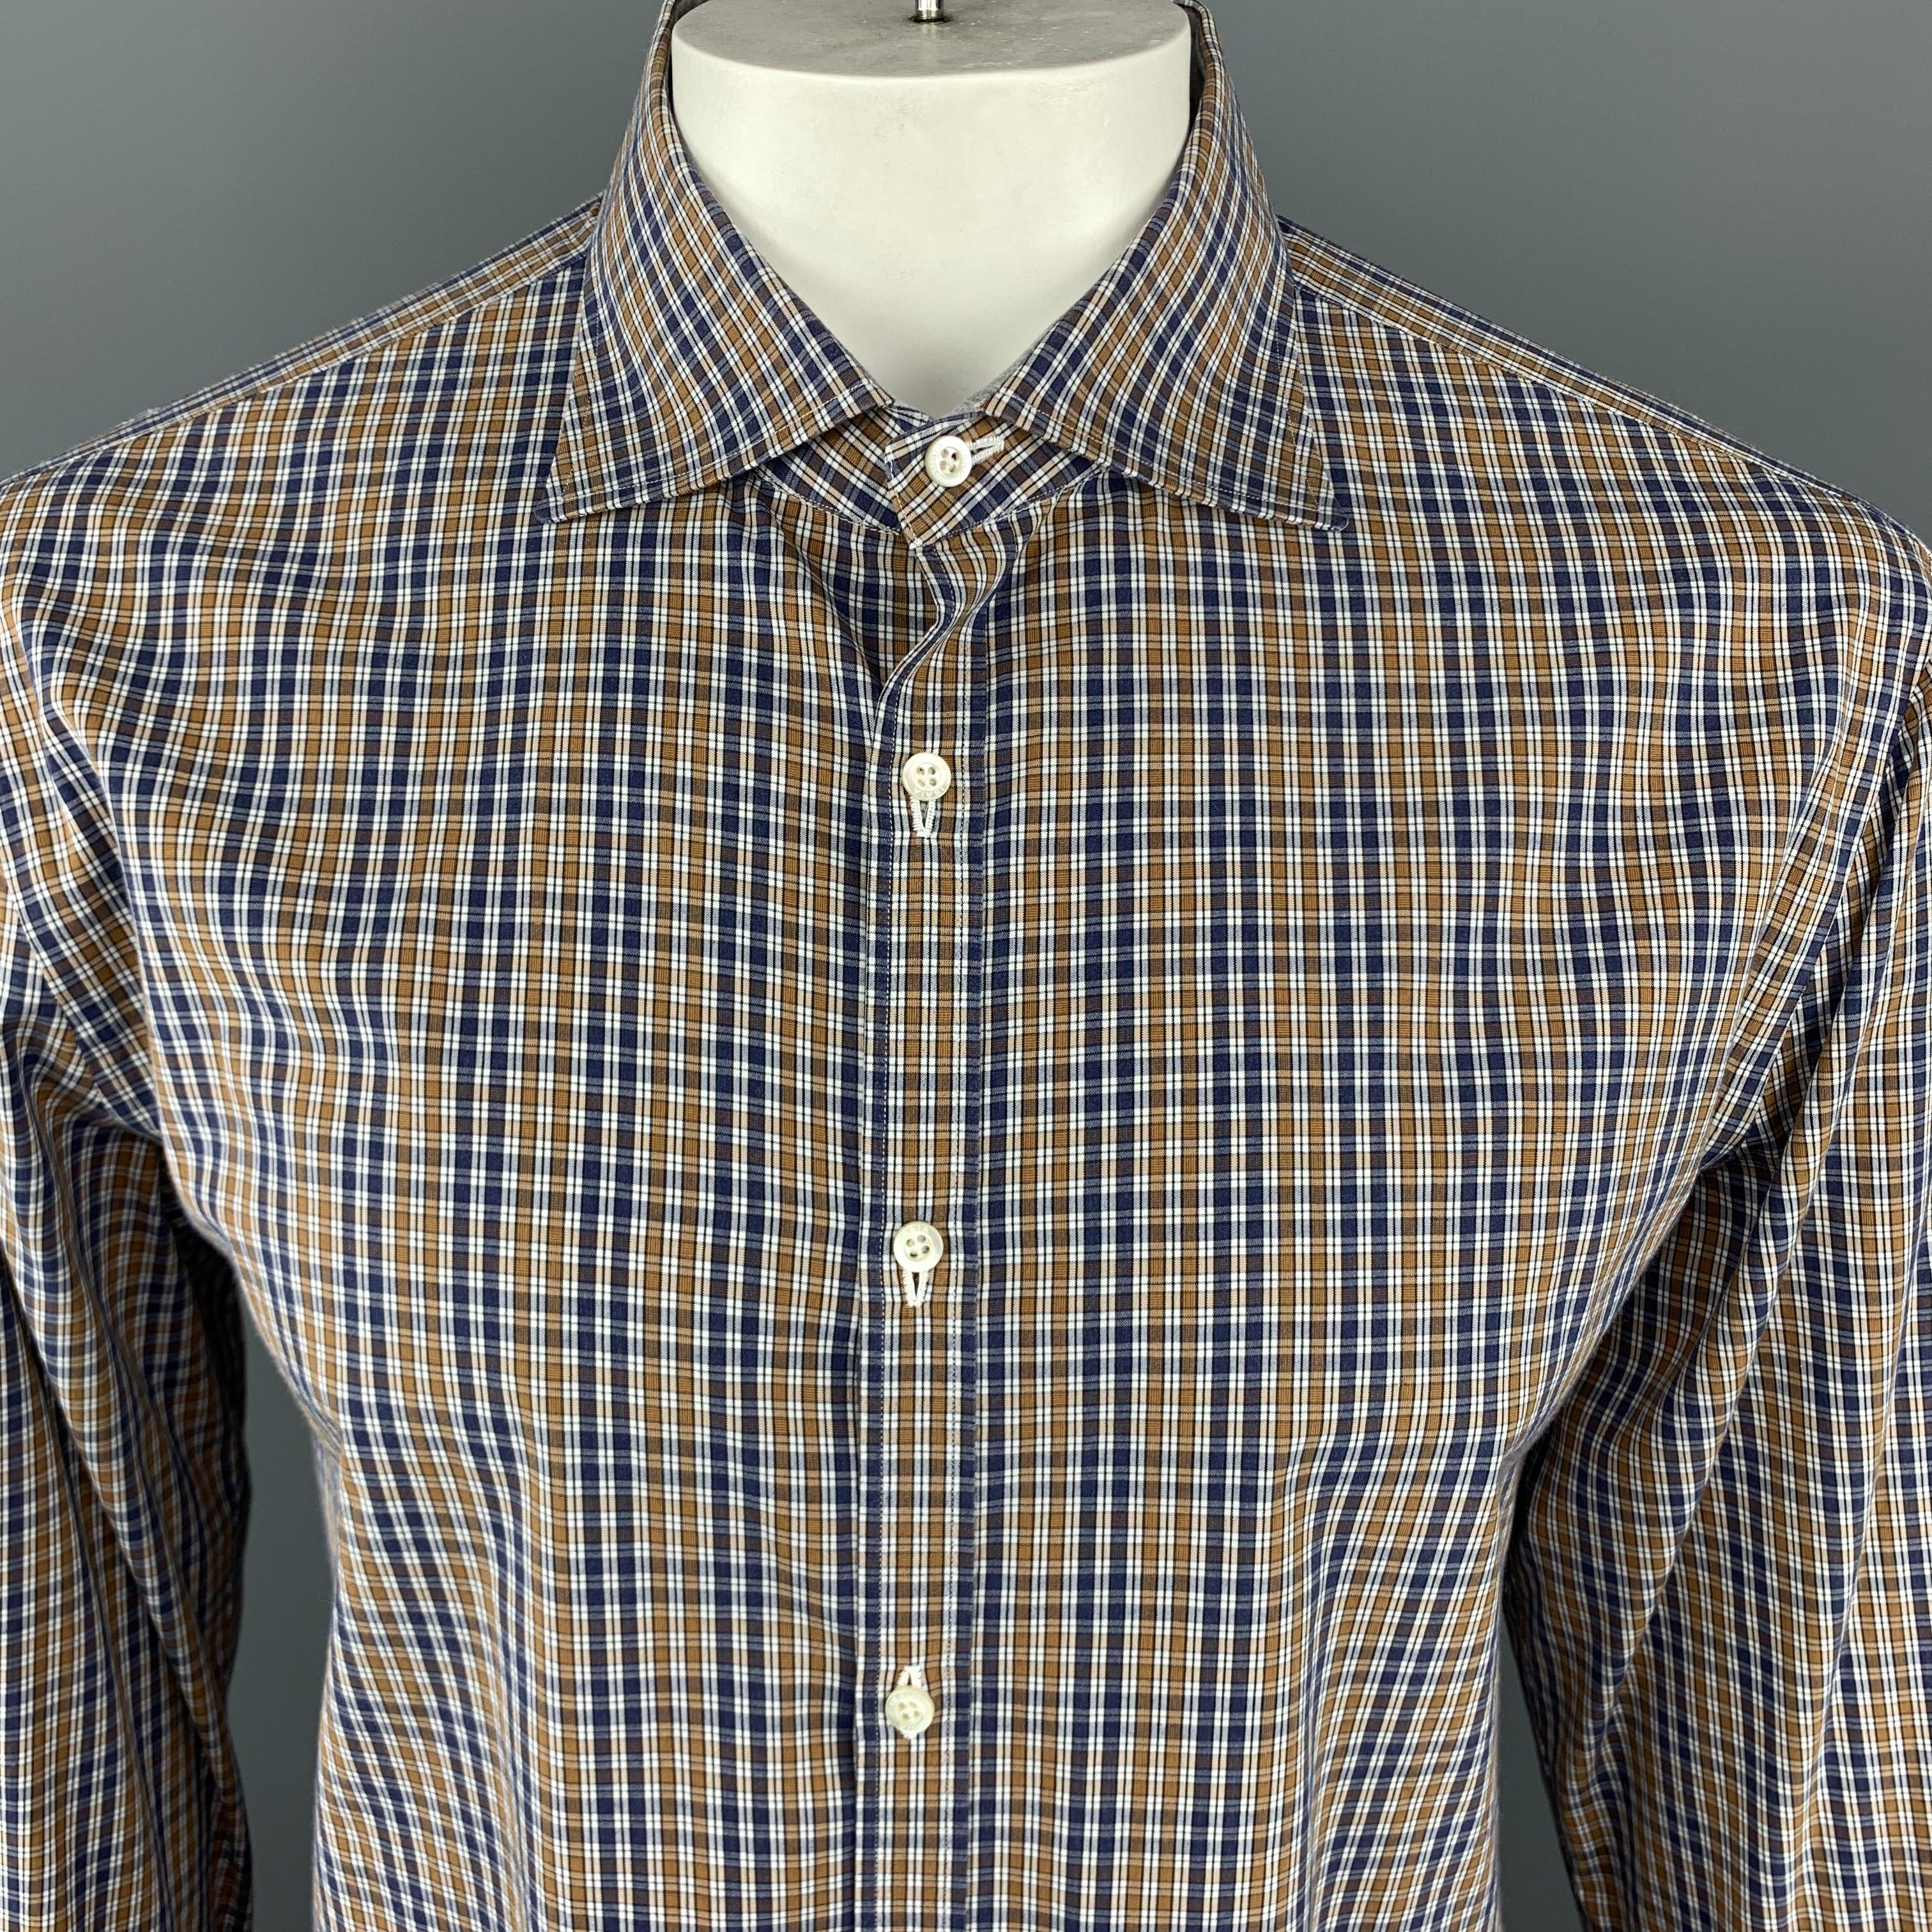 ISAIA Long Sleeve Shirt comes in navy and brown tones in a plaid cotton material, with a spread collar, buttoned cuffs, button up. Made in Italy.

Excellent Pre-Owned Condition.
Marked: 17 / 43

Measurements:

Shoulder: 18.5 in. 
Chest: 48 in.